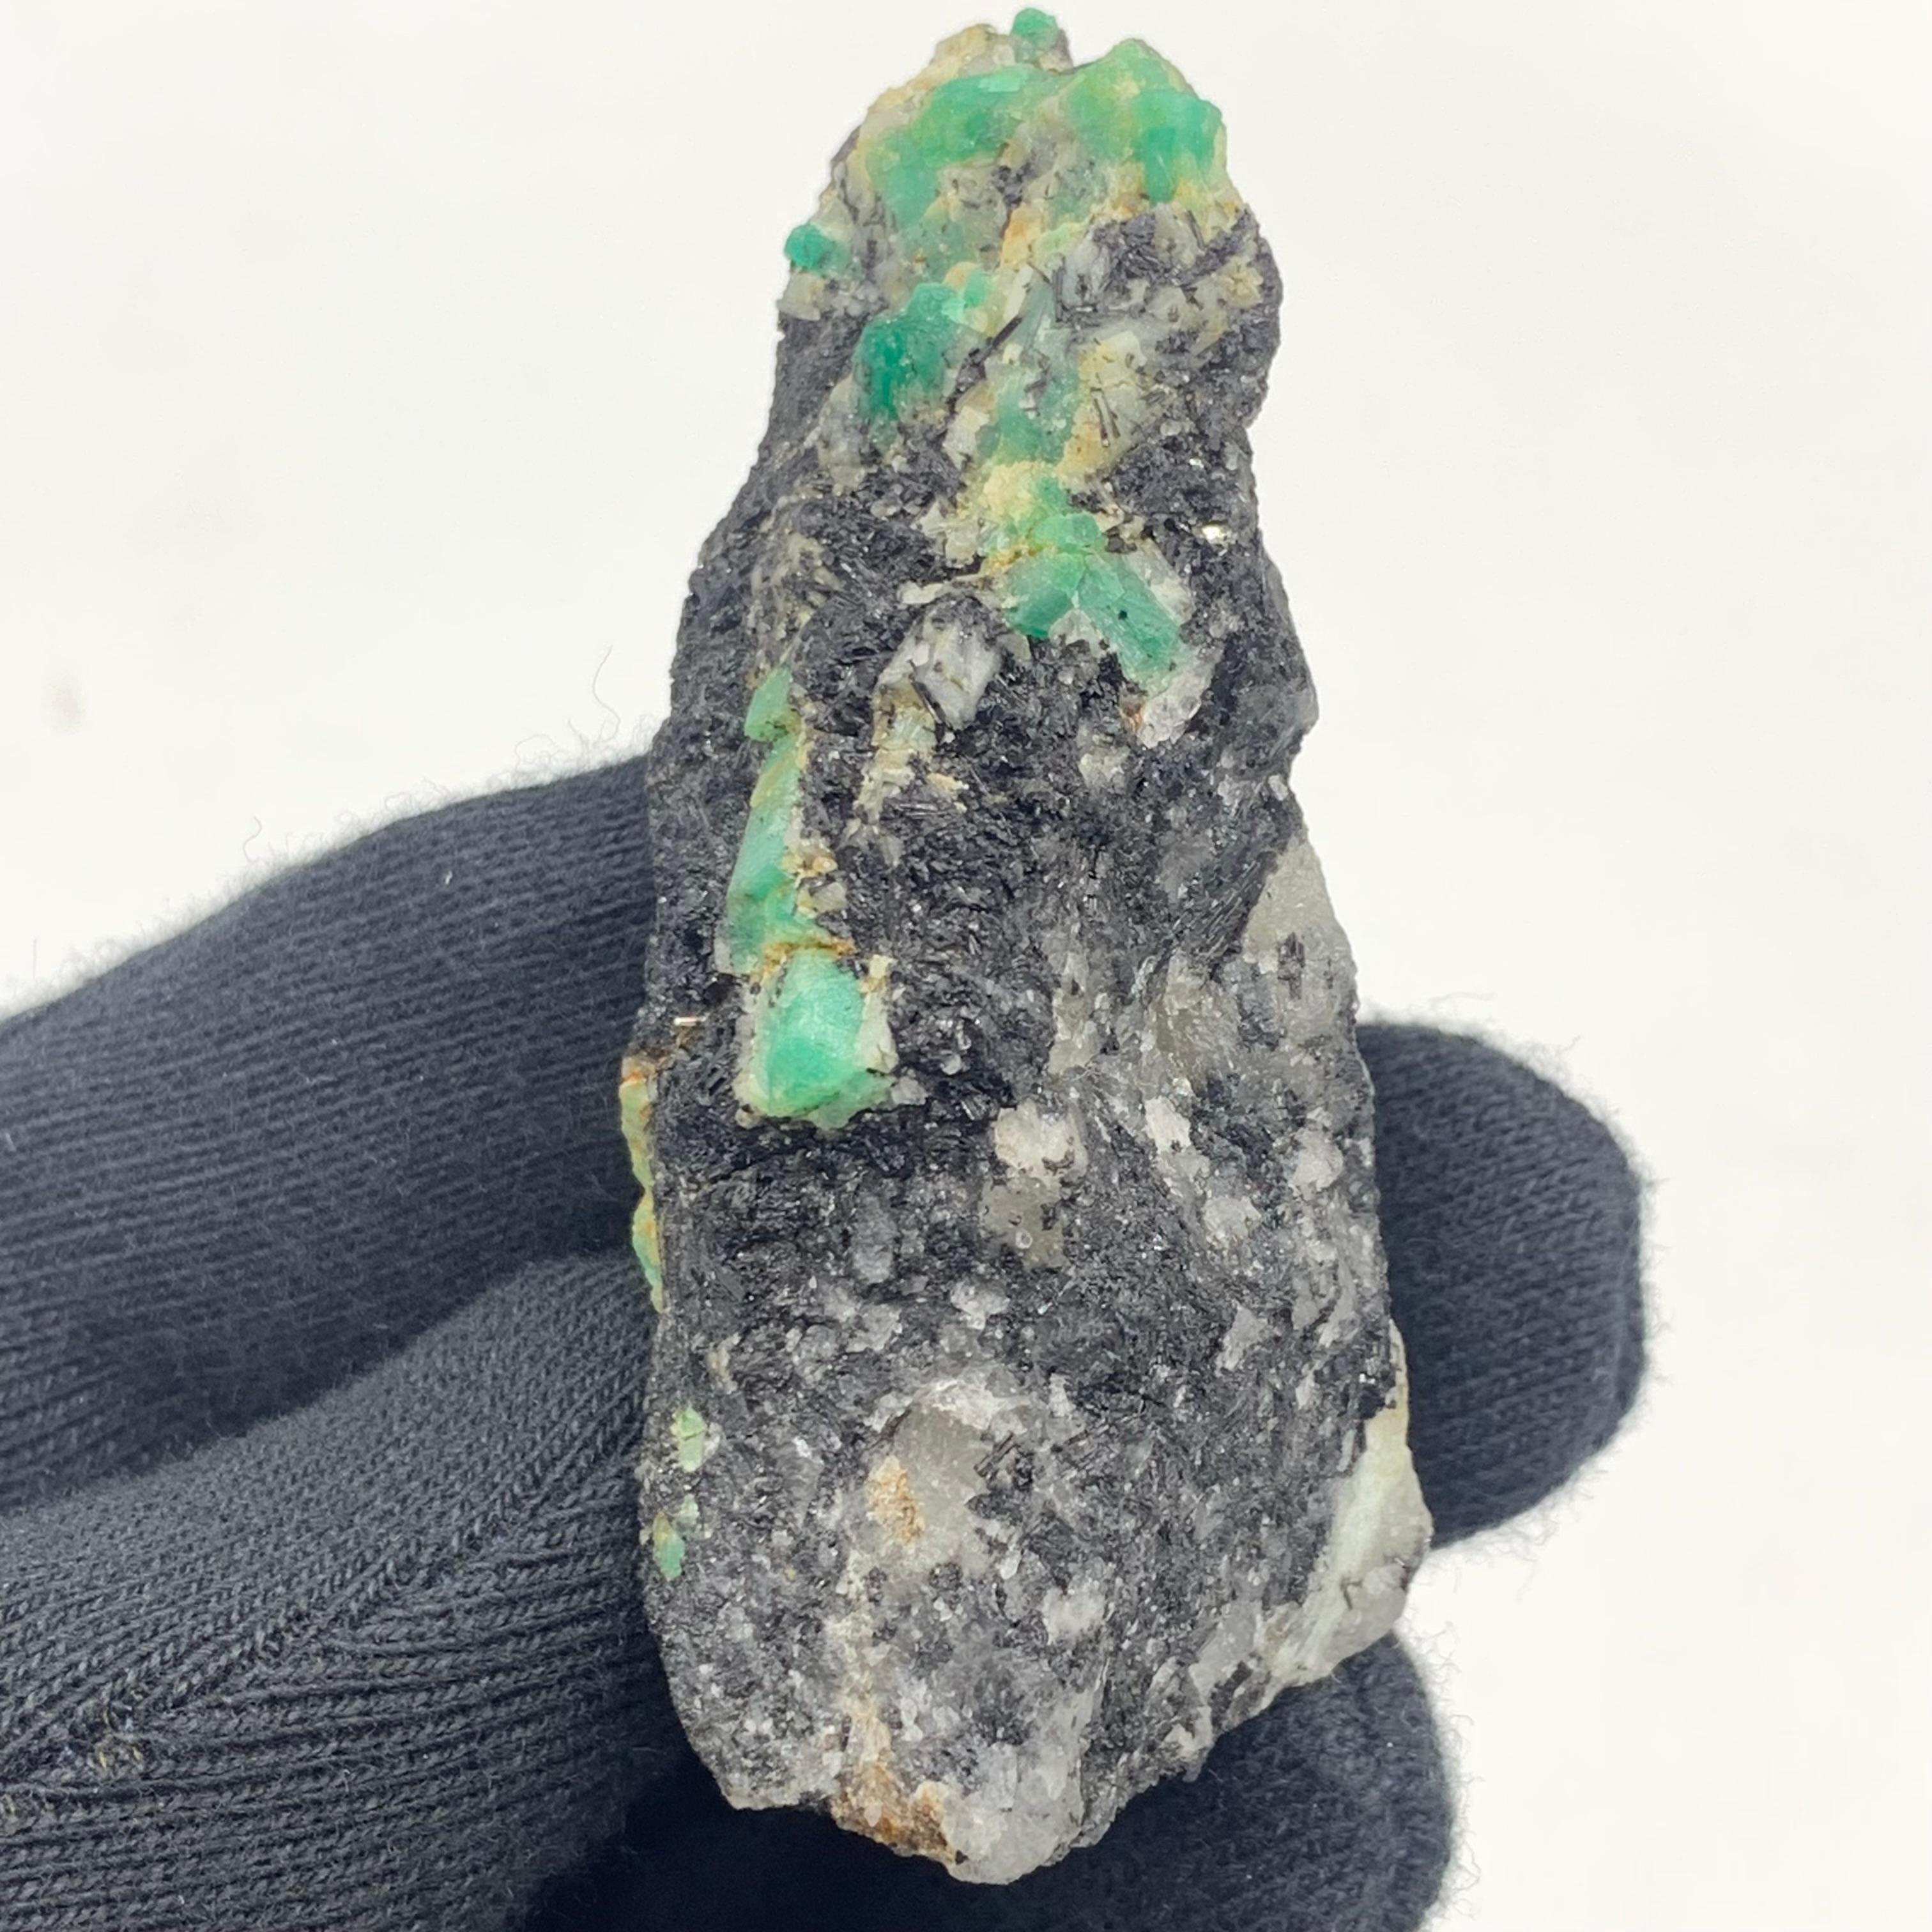 43.05 Gram Adorable Emerald Specimen From Chitral, Pakistan 
Weight: 43.05 Gram
Dimension: 6.8 x 2.6 x 2.3 Cm
Origin: Chitral, Khyber Pukhtunkhwa, Pakistan 

Emerald is a gemstone and a variety of the mineral beryl colored green by trace amounts of